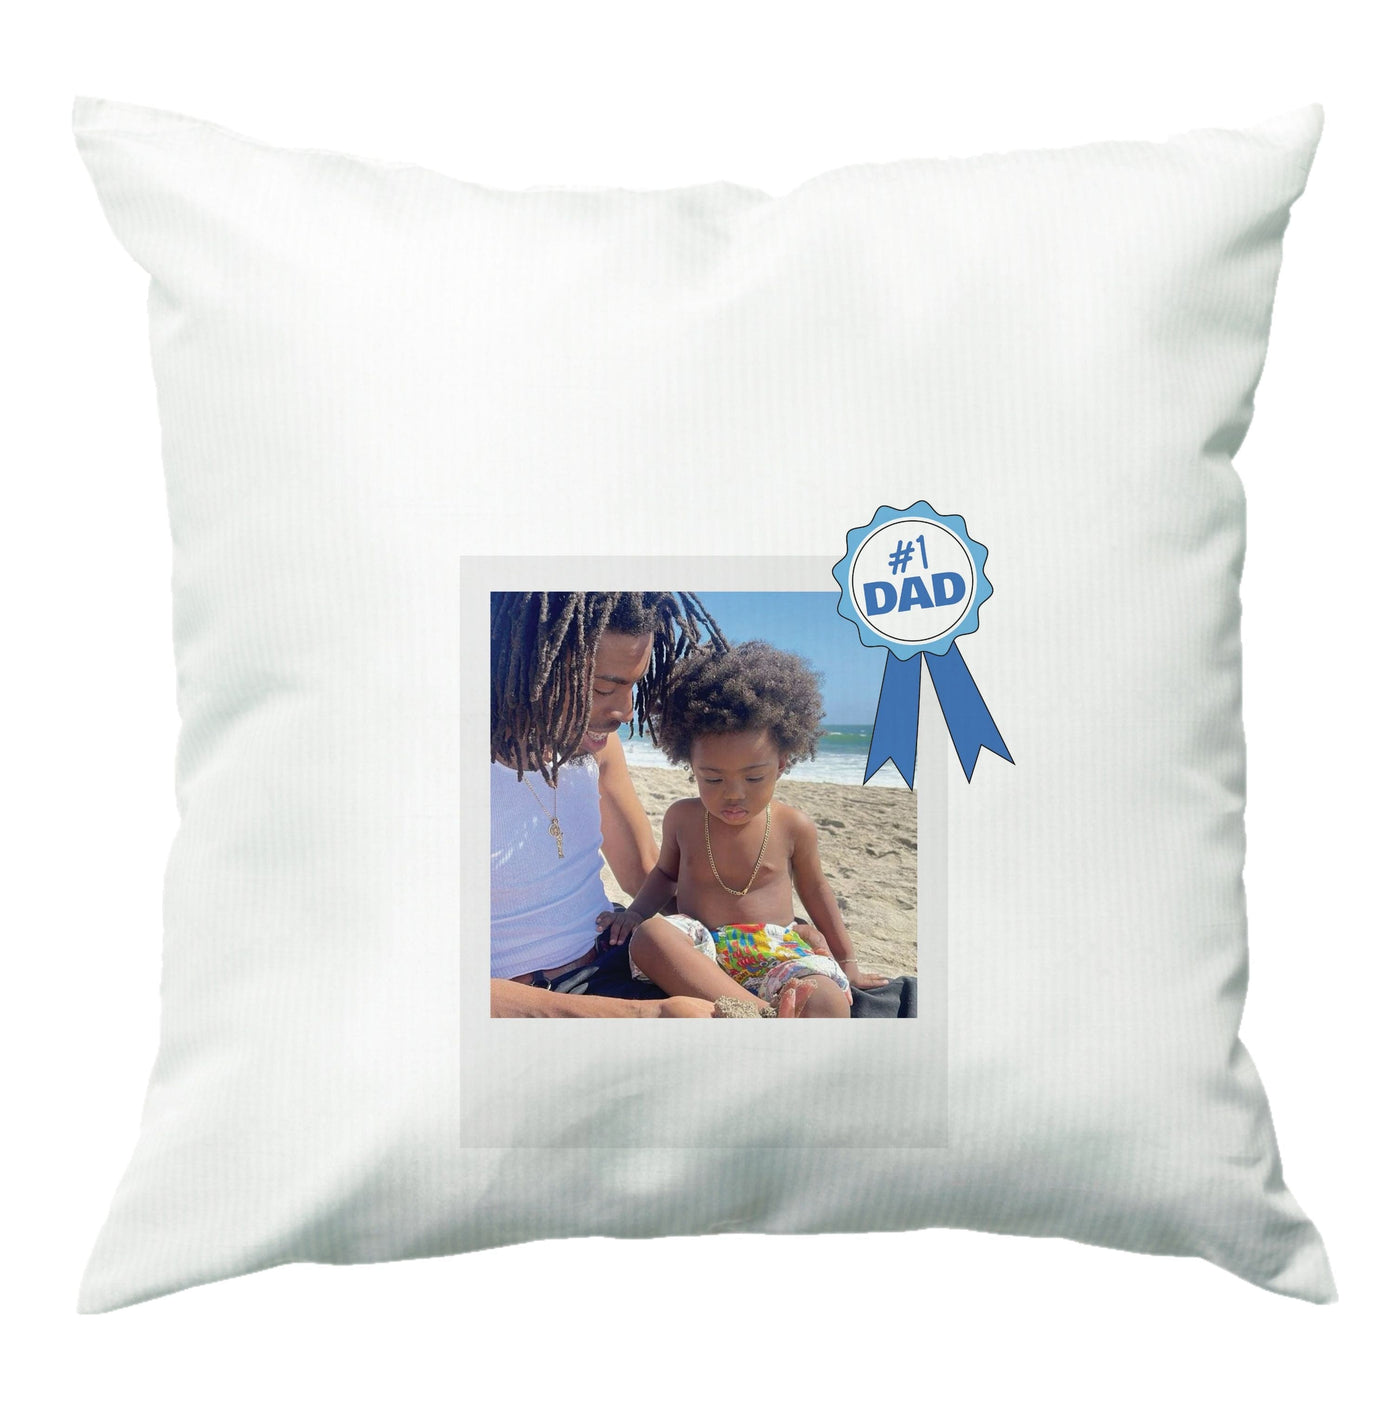 Number 1 Dad - Personalised Father's Day Cushion